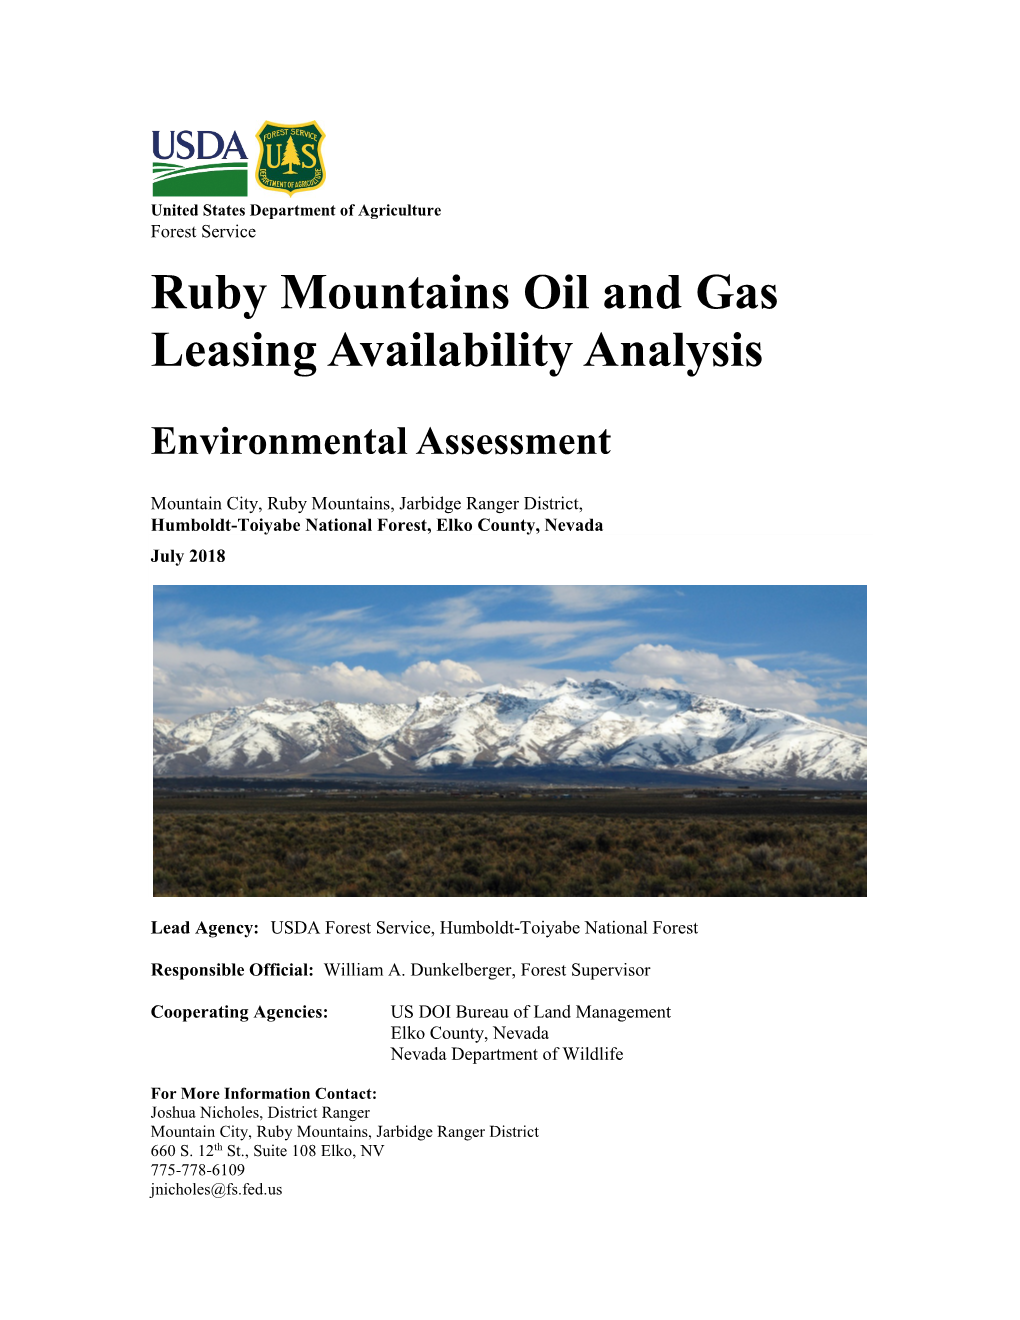 US Forest Service Ruby Mountains Oil and Gas Leasing Availability